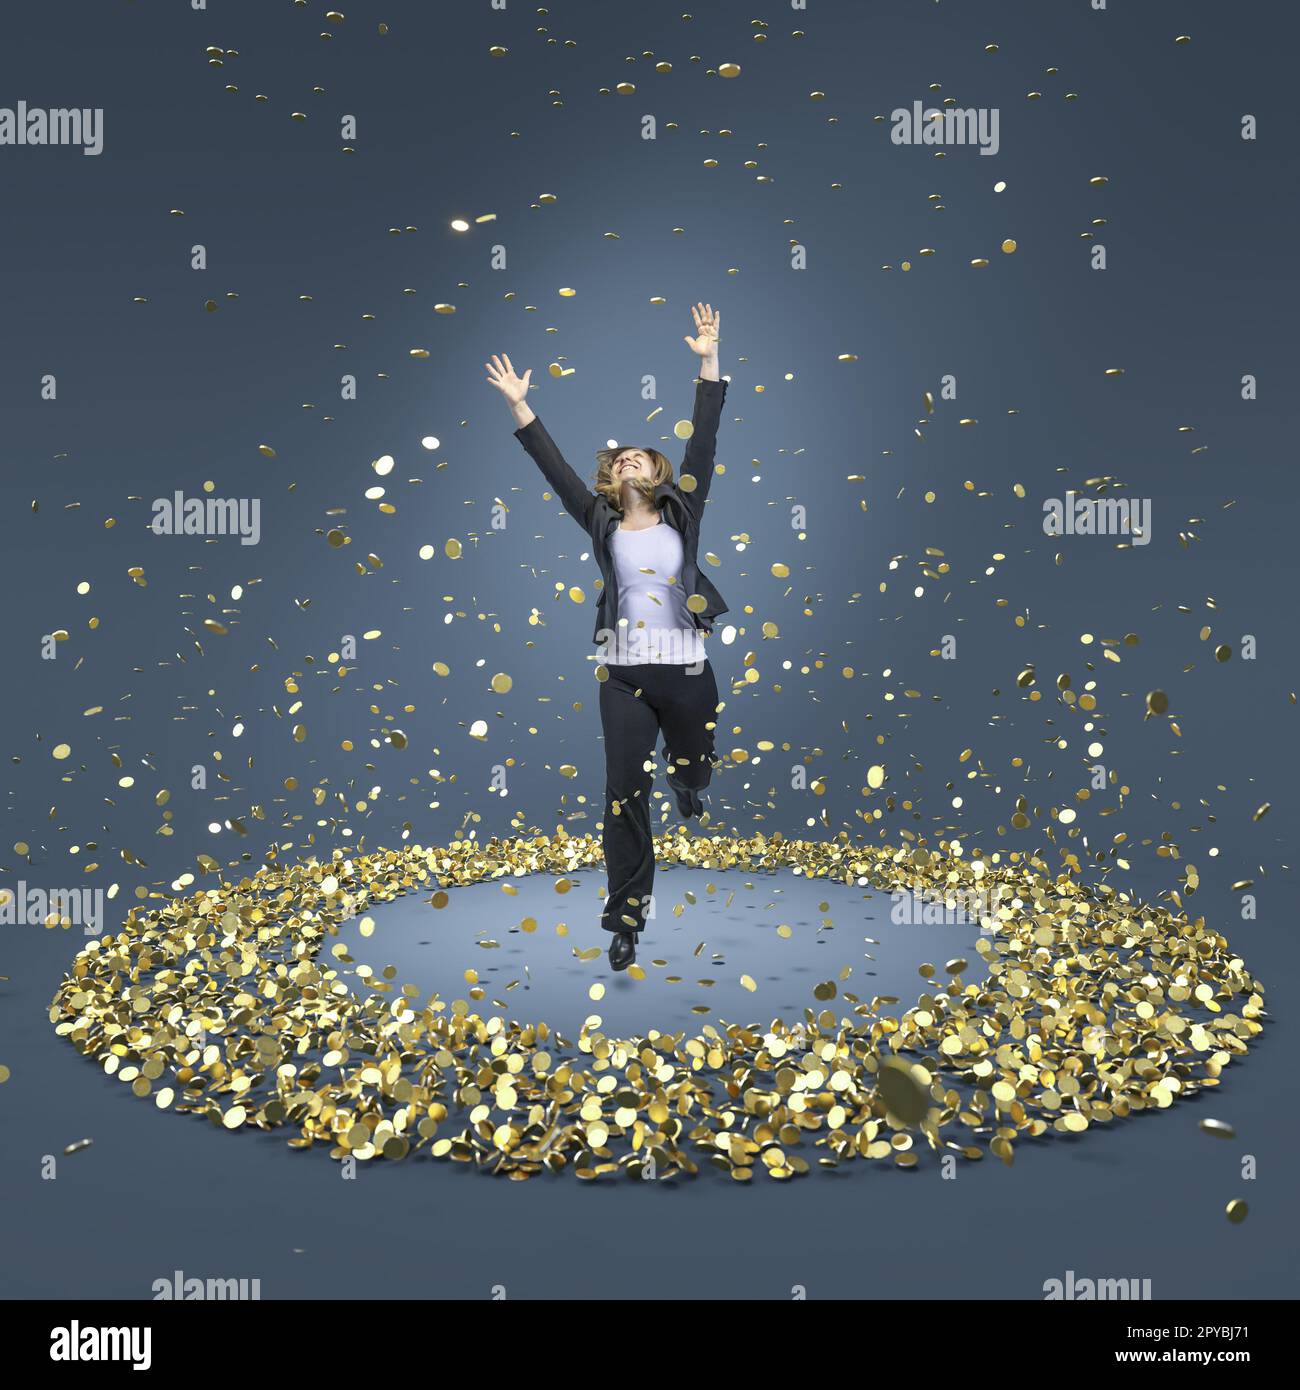 businesswoman jumps happily into a circle of gold coins Stock Photo